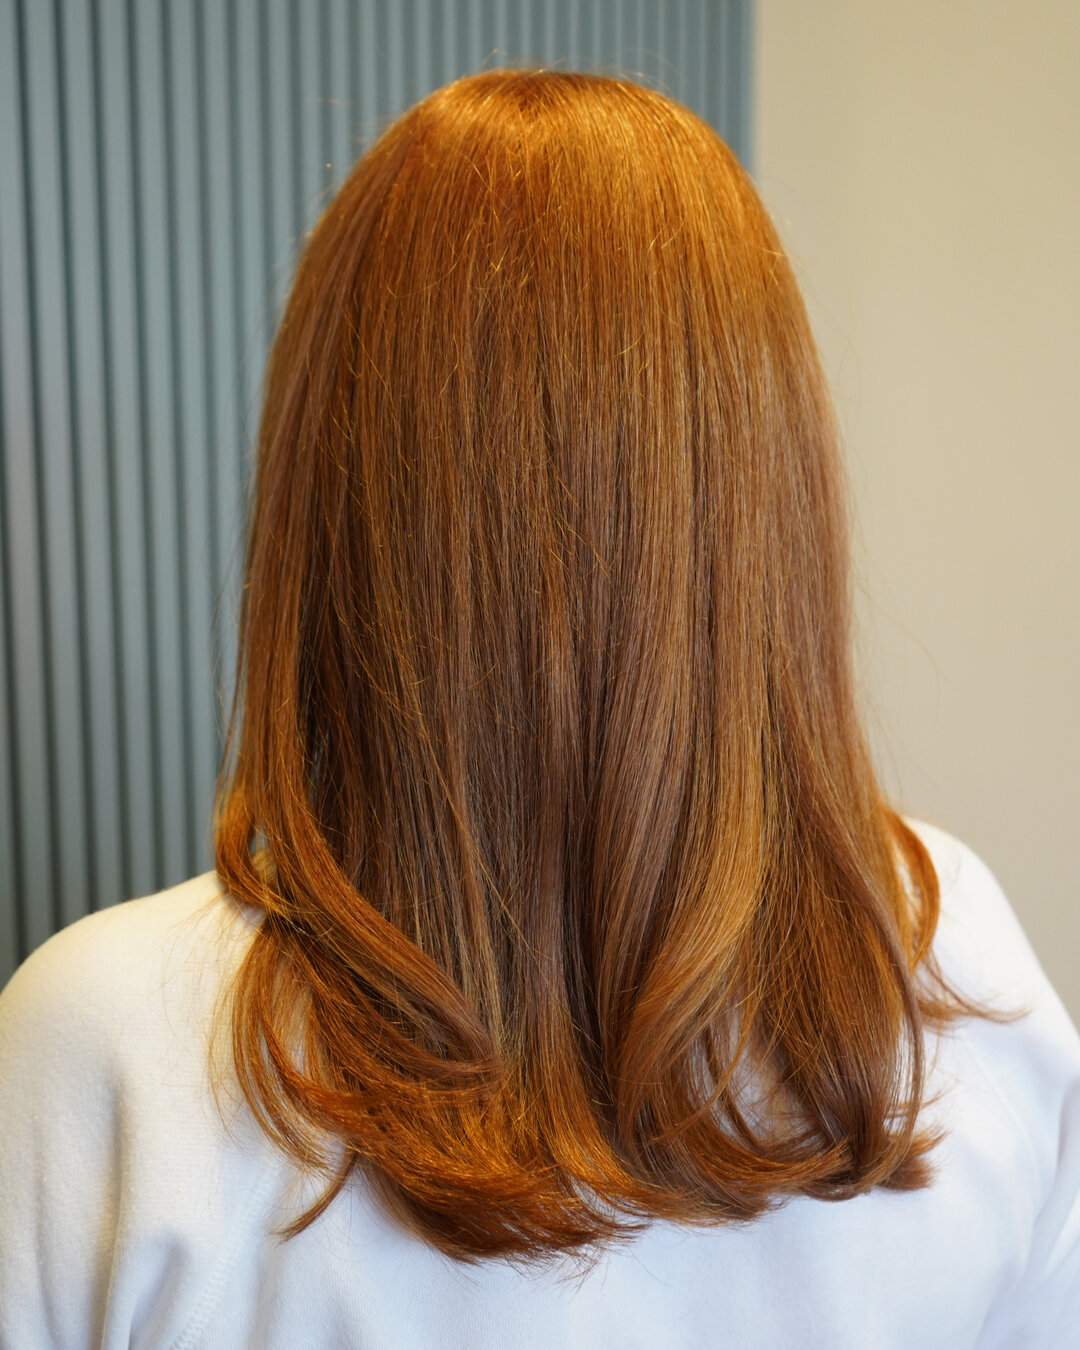 We heard it&rsquo;s pumpkin spice season&hellip;😉​​​​​​​​
​​​​​​​​
How gorgeous is this color? ✨This beauty queen is ready for fall with her new look!​​​​​​​​
​​​​​​​​
@christinerileyhair ​​​​​​​
​​​​​​​​
📲link in bio to book your September appoint